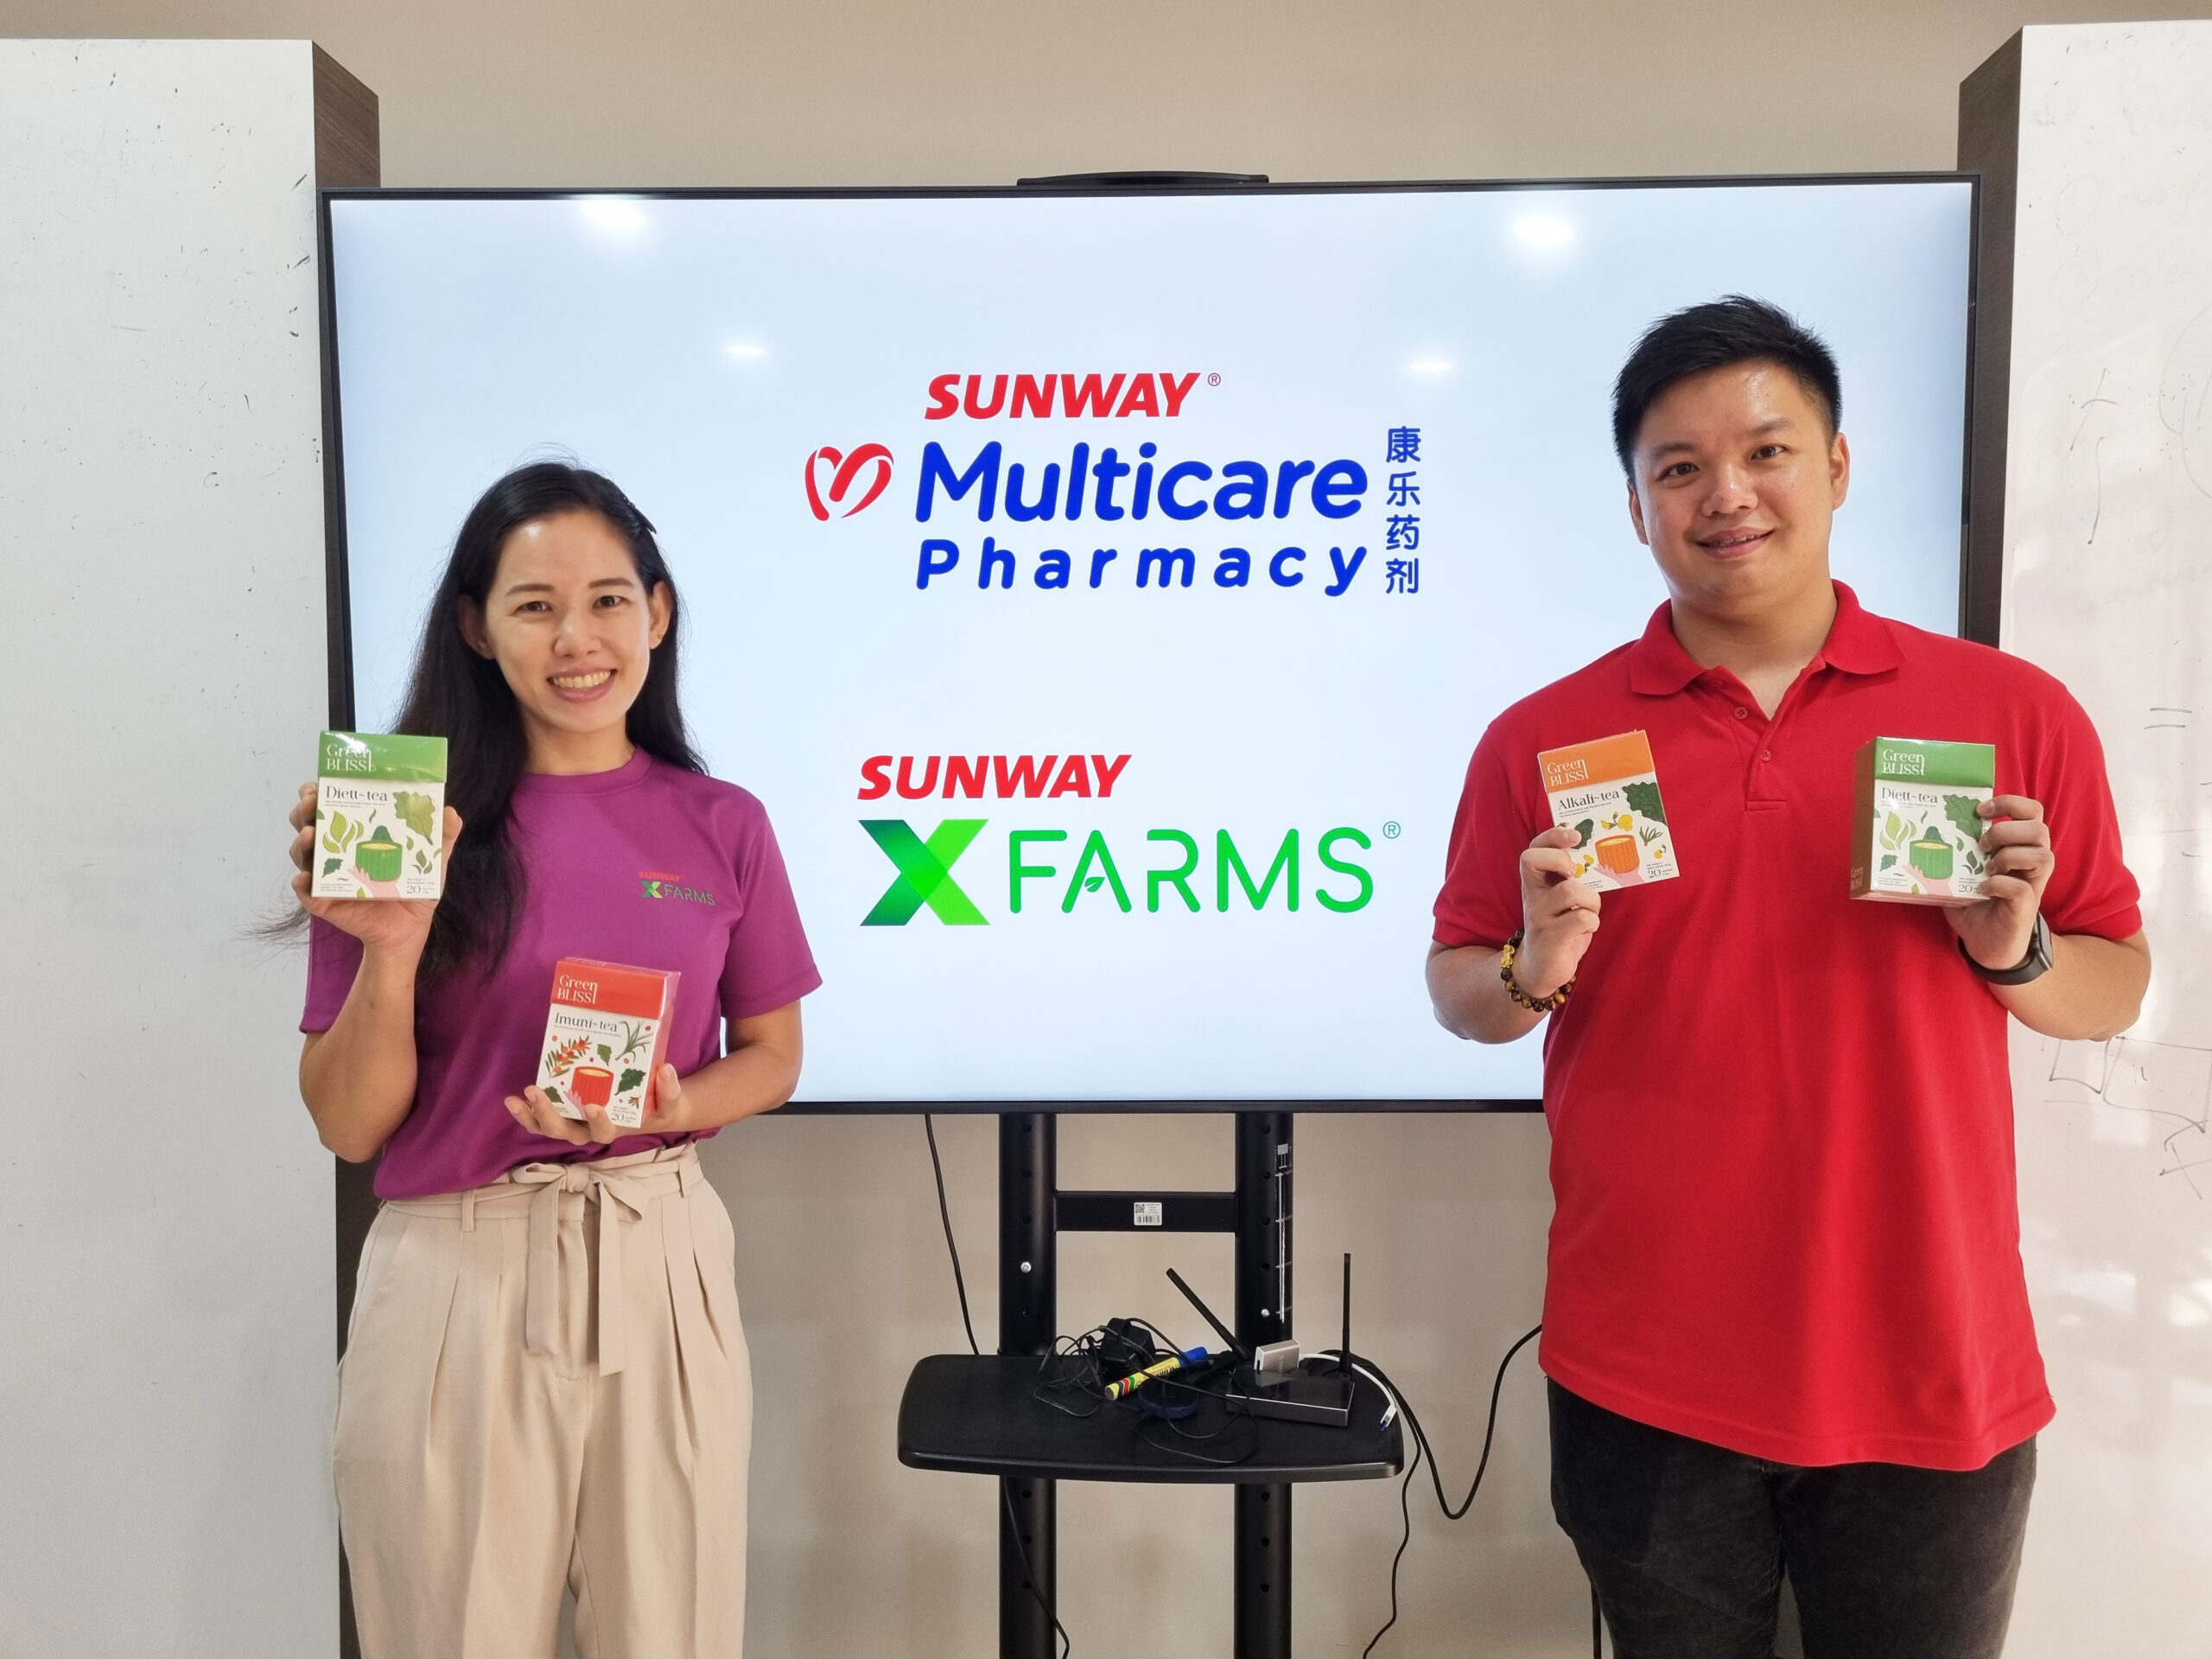 Sunway multicare pharmacy and sunway xfarms' collaboration